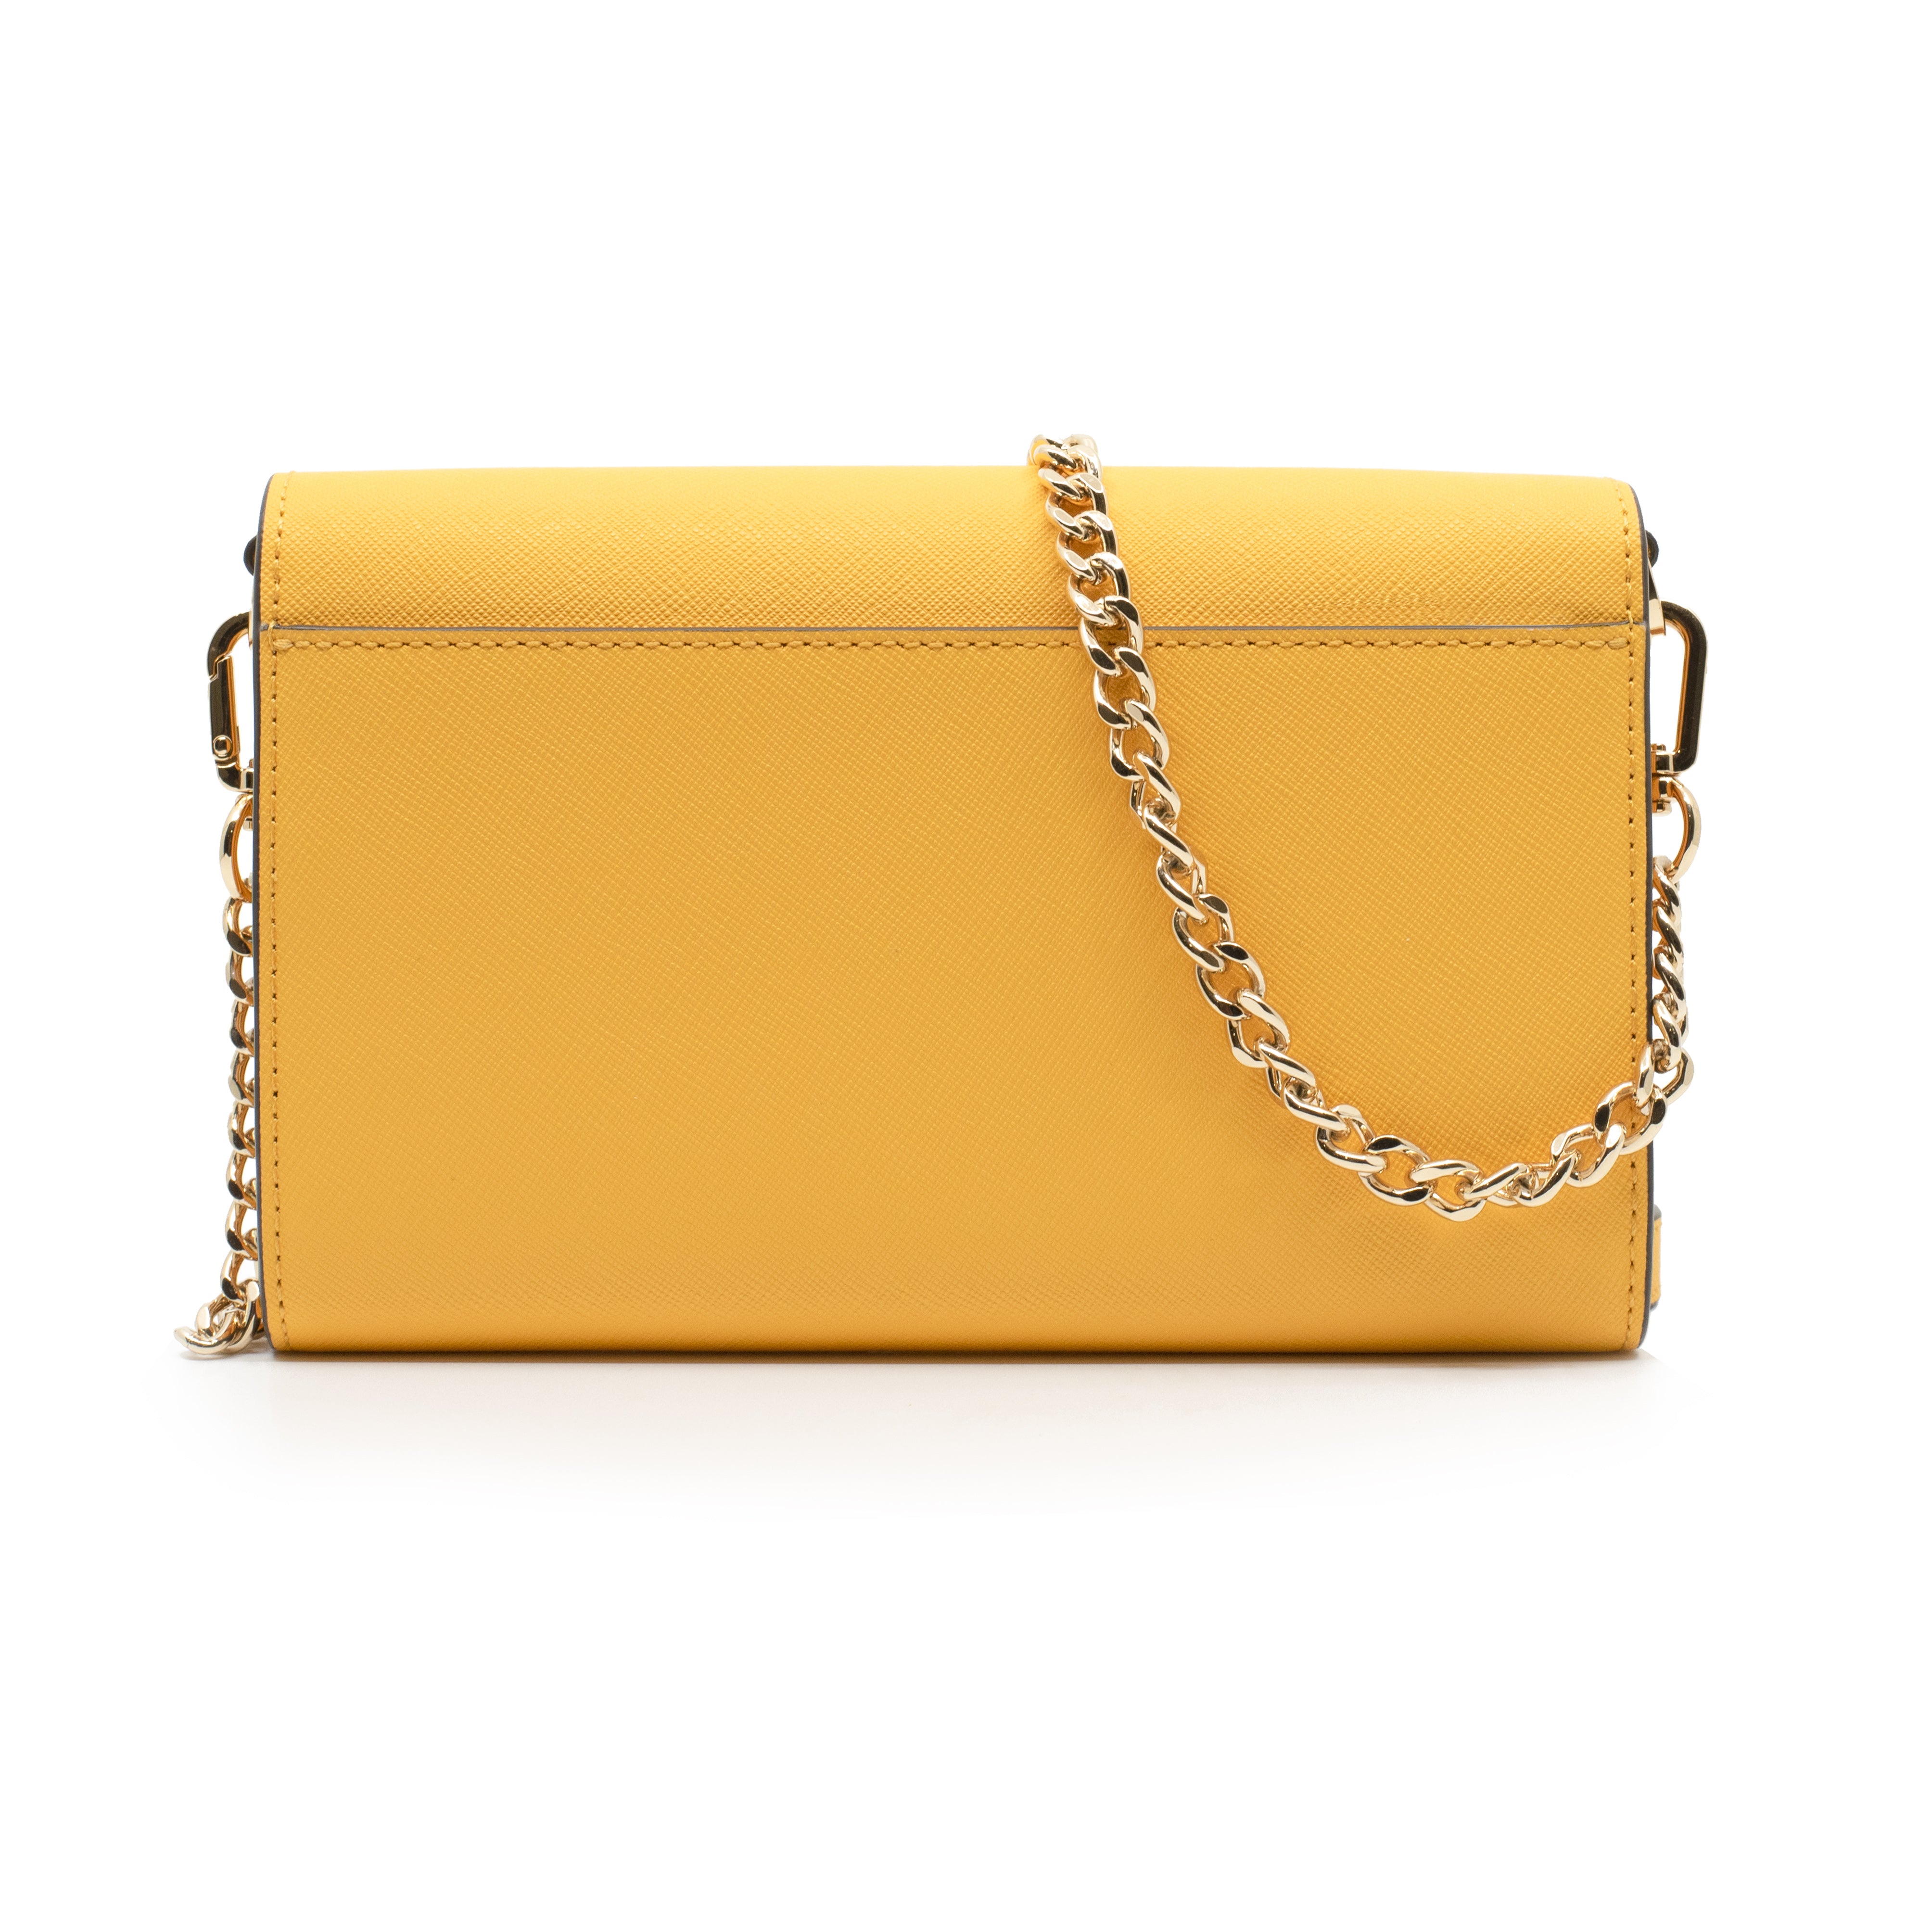 Emerson Chain Wallet in Solar Yellow